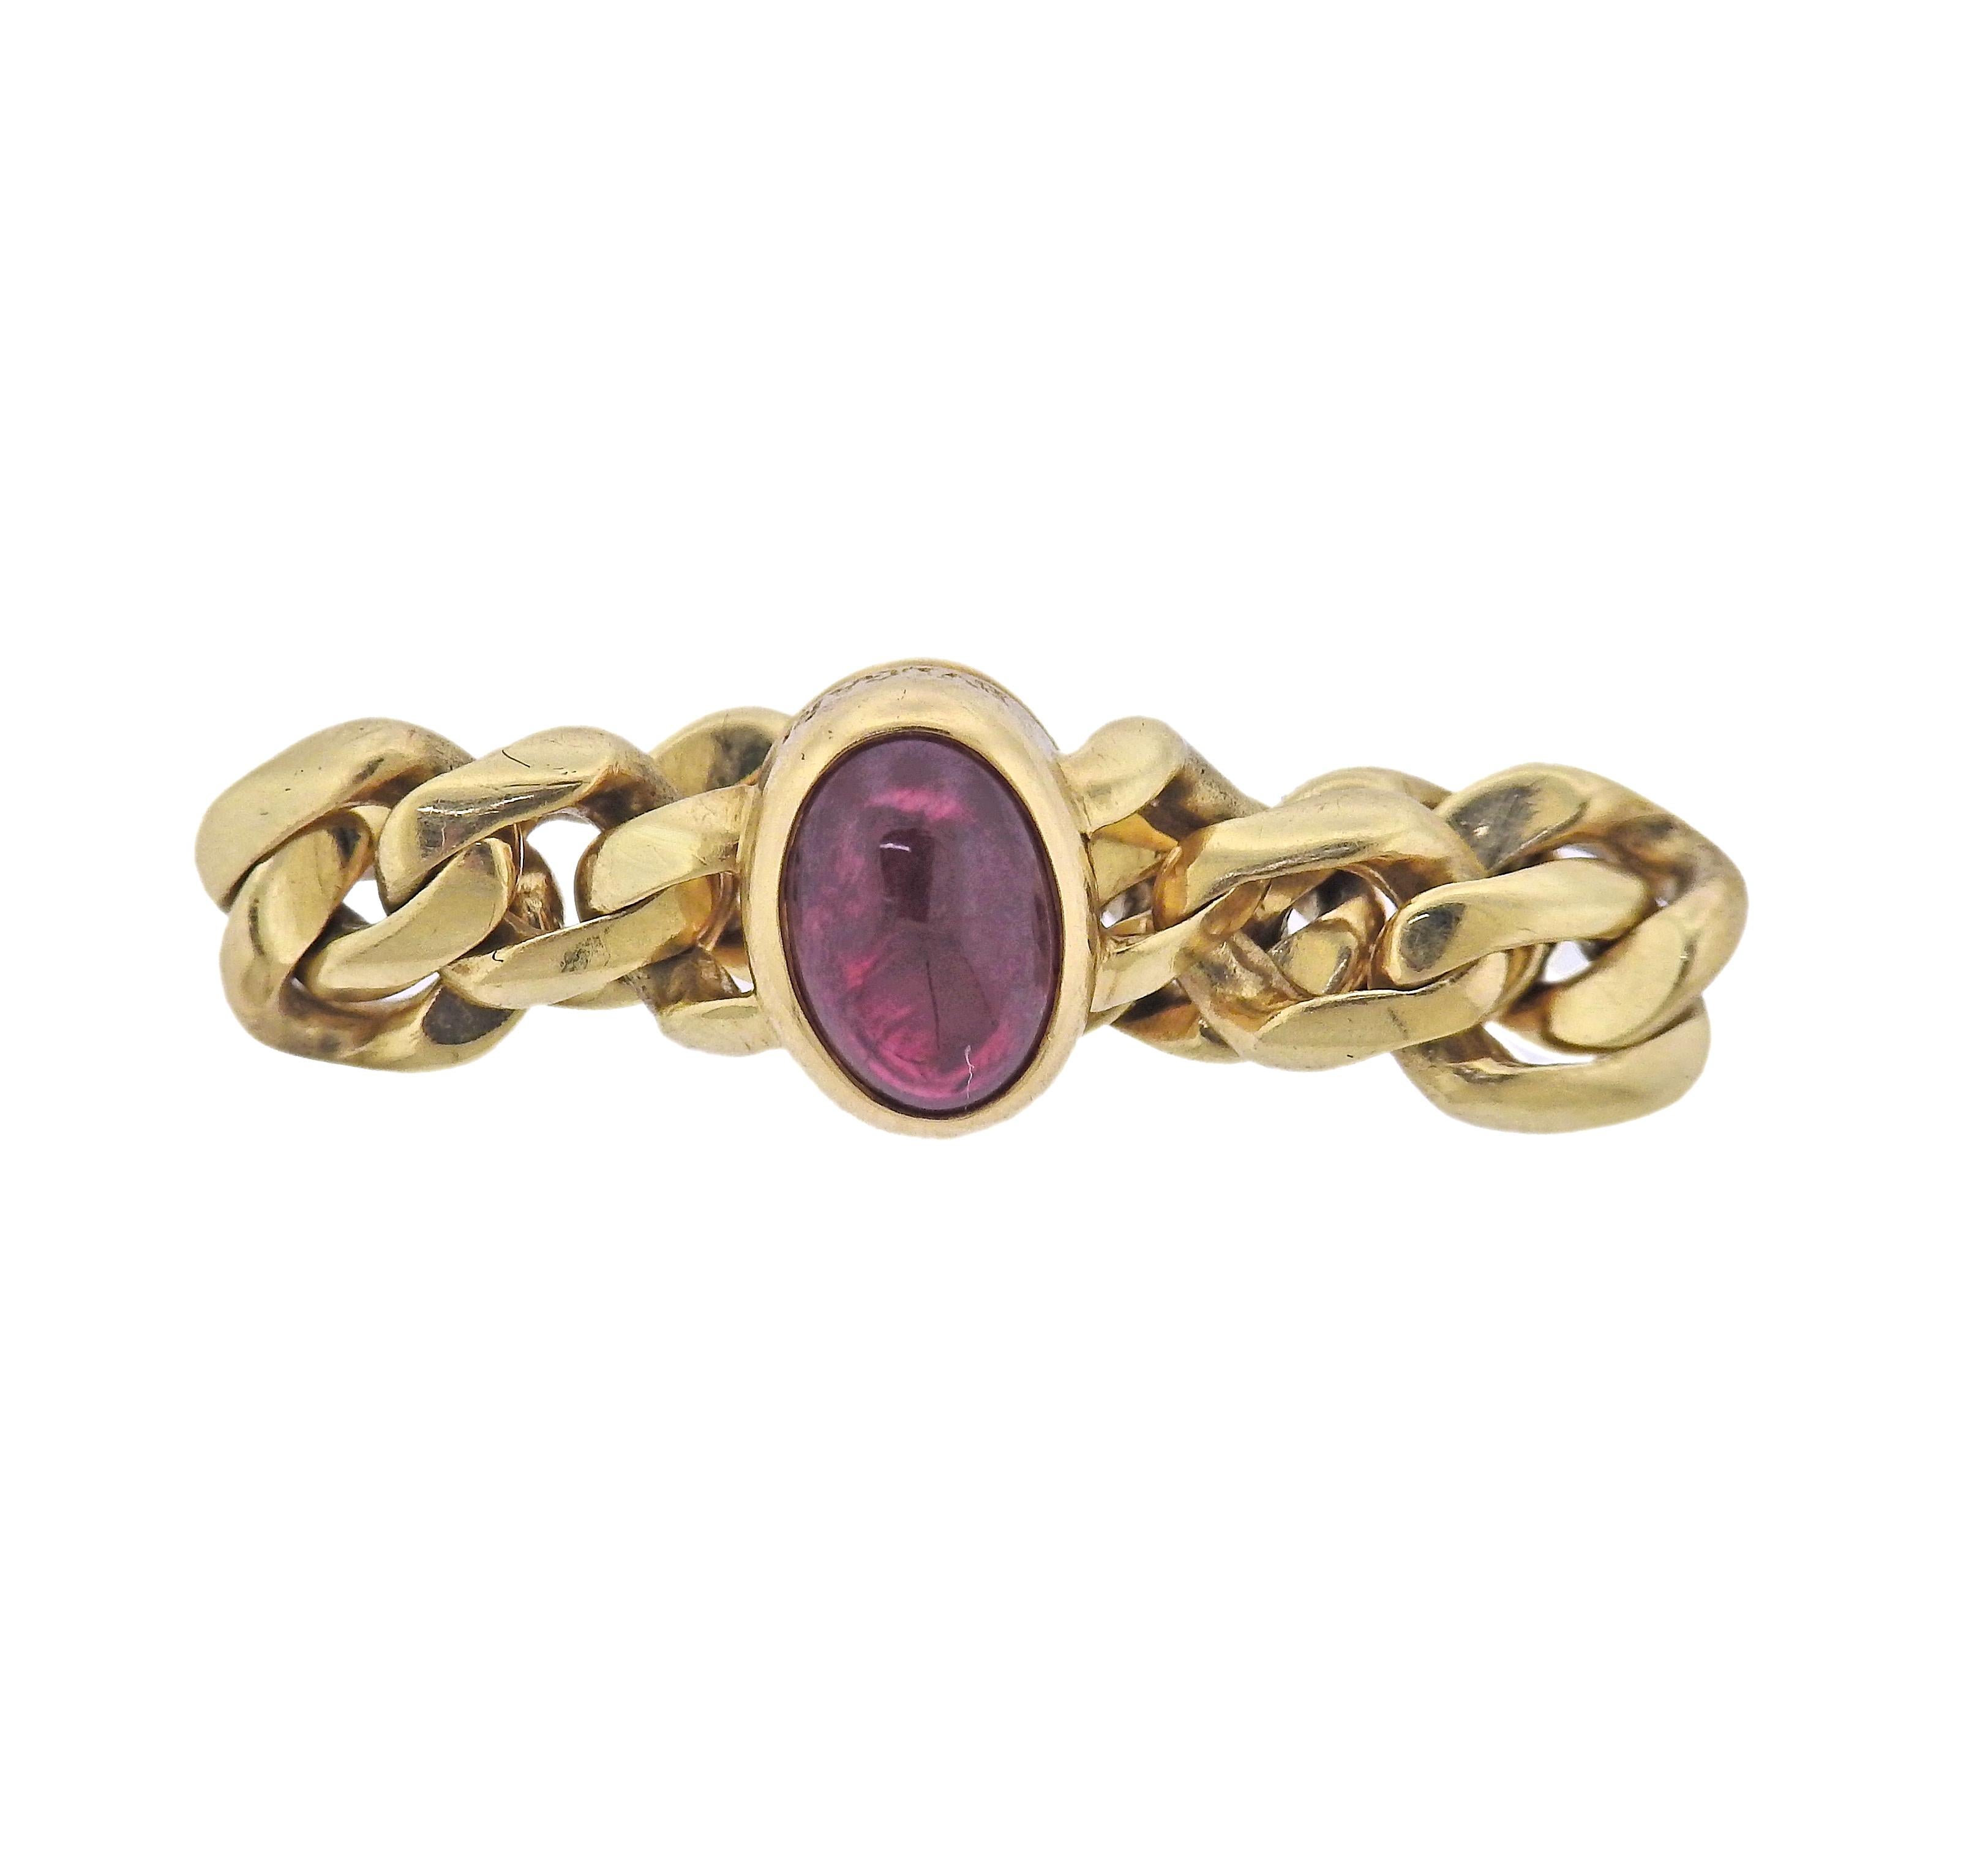 1980s 18k gold chain ring by Bvlgari, with oval ruby cabochon (approx. 2.08ct). Ring size 7.25-7.5, widest point of the ring is 10mm. Marked: Bvlgari. Weight - 7.5 grams.